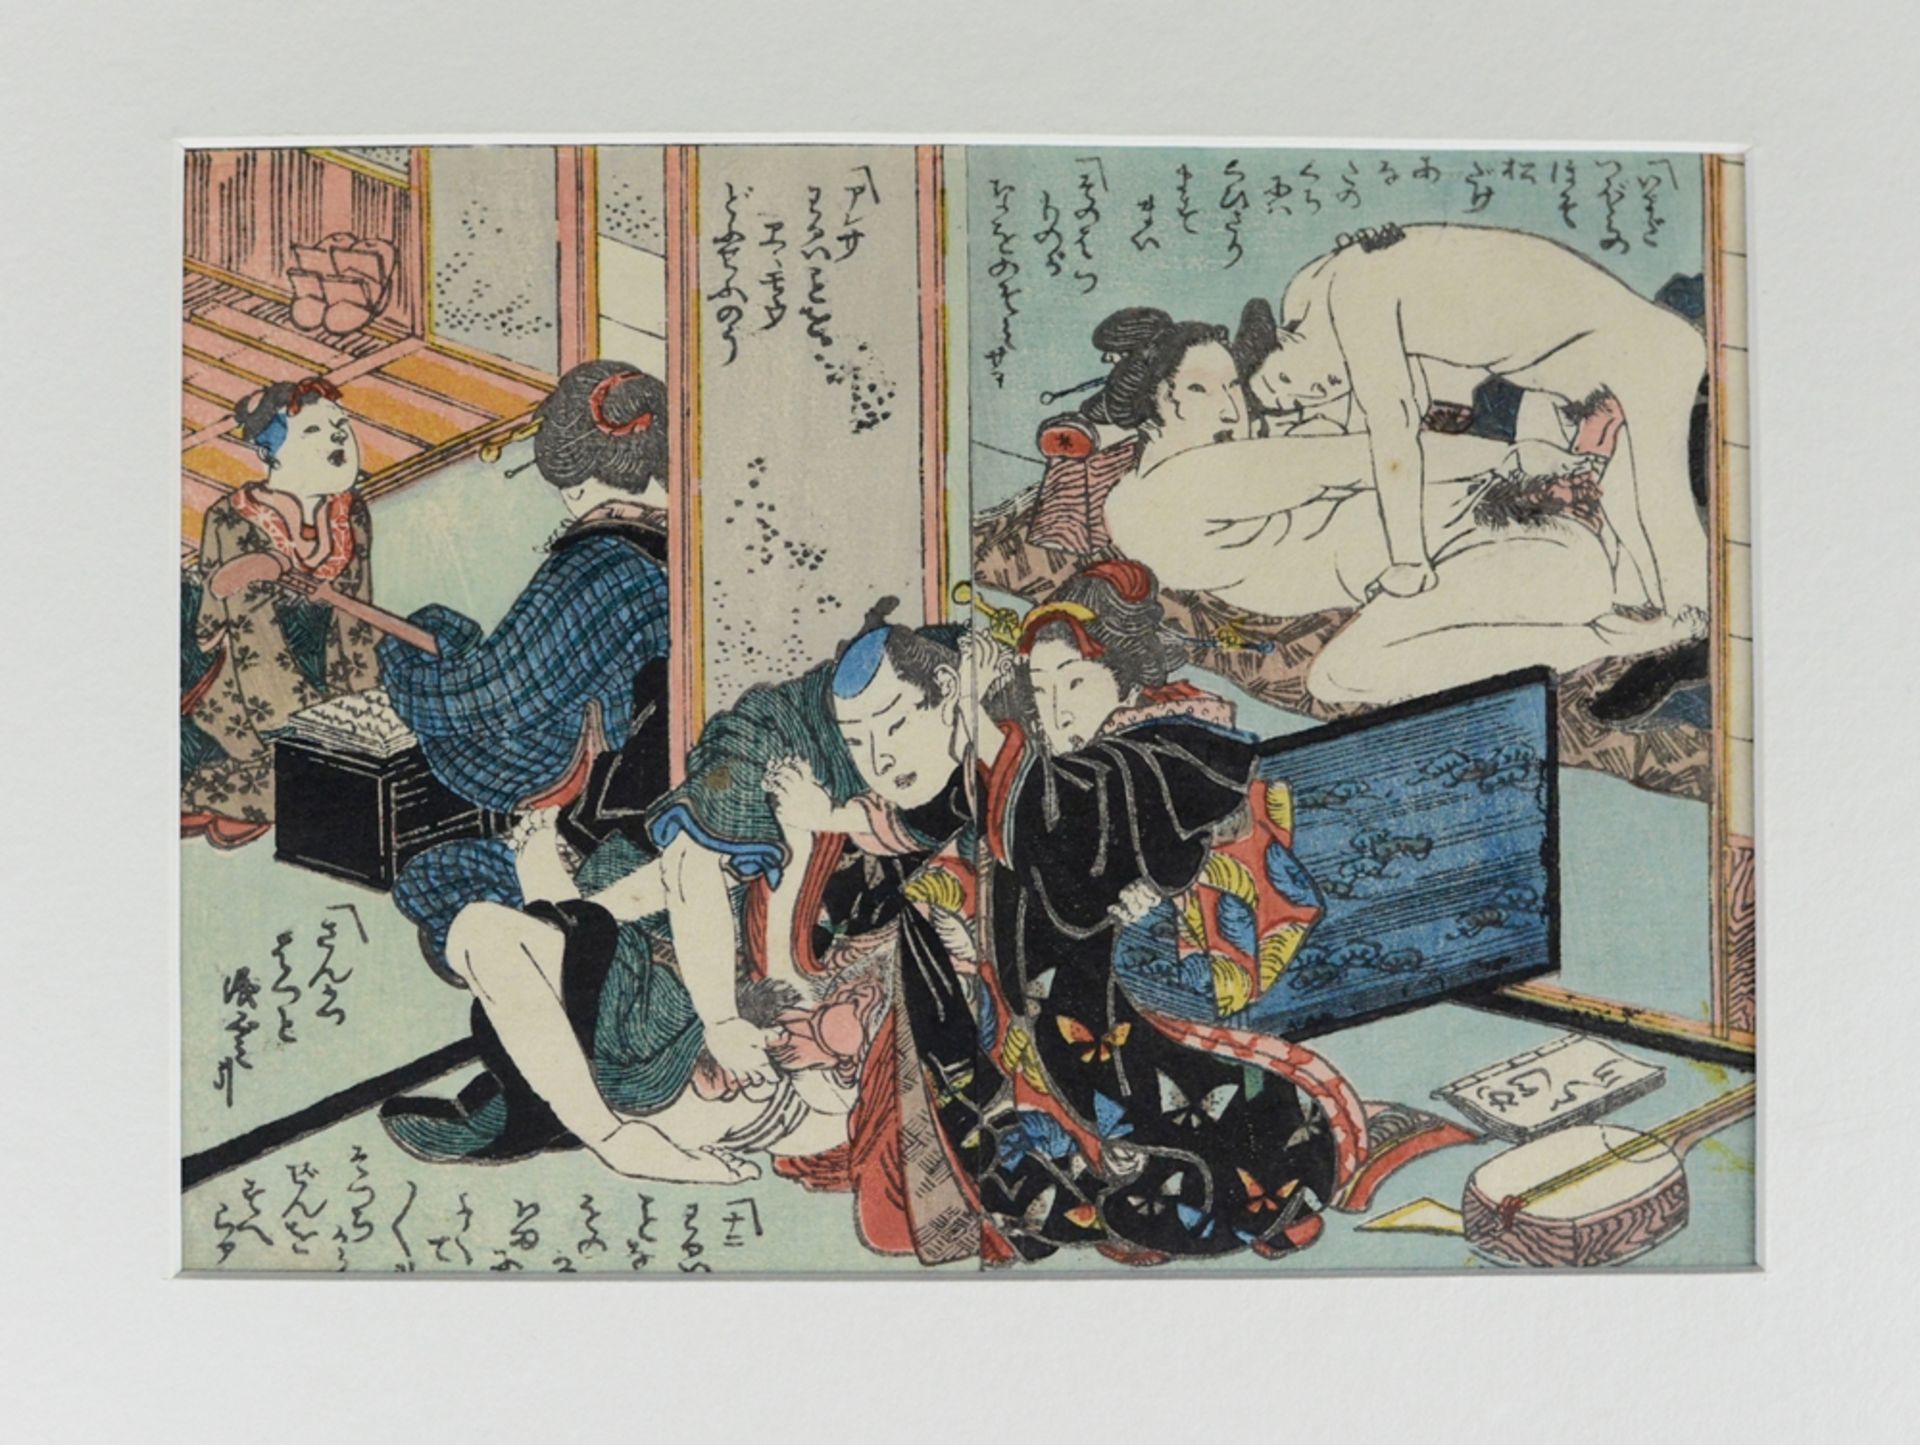 Erotic scenes, "Shunga", colour woodcut on two papers, Japan, 19th century, dimensions of both